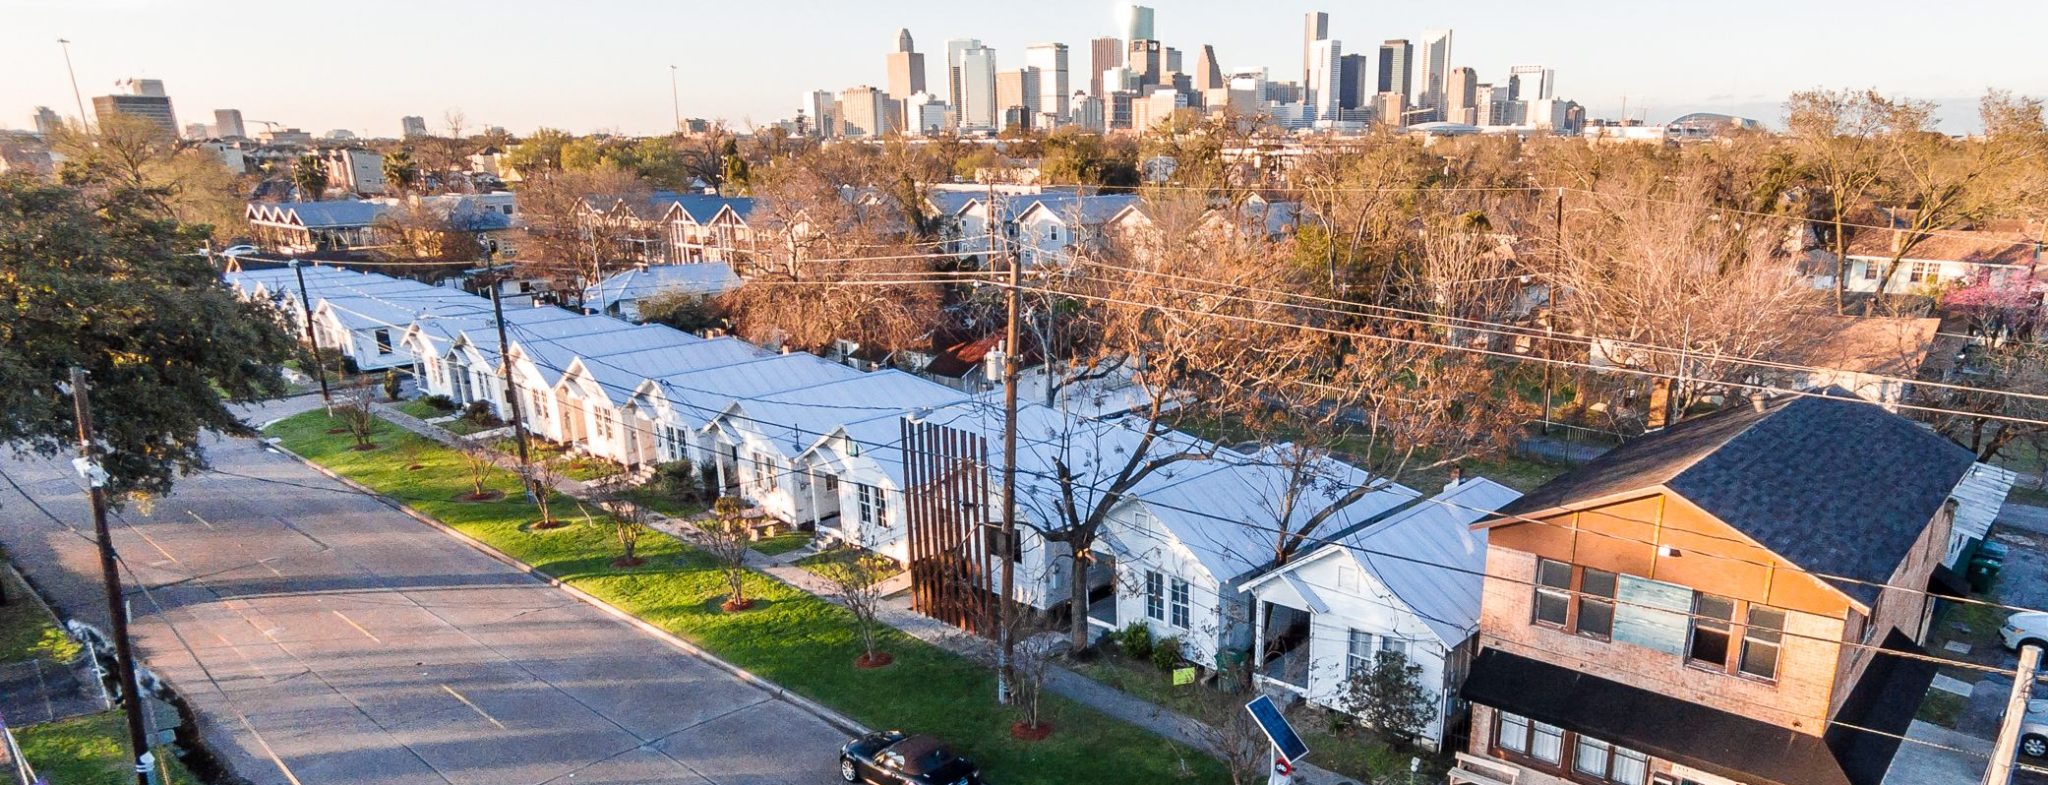 Aerial View Of Project Row Houses In 2015 Photo By Peter Molick Courtesy Of Project Row Houses E1638808554907 2048x785 